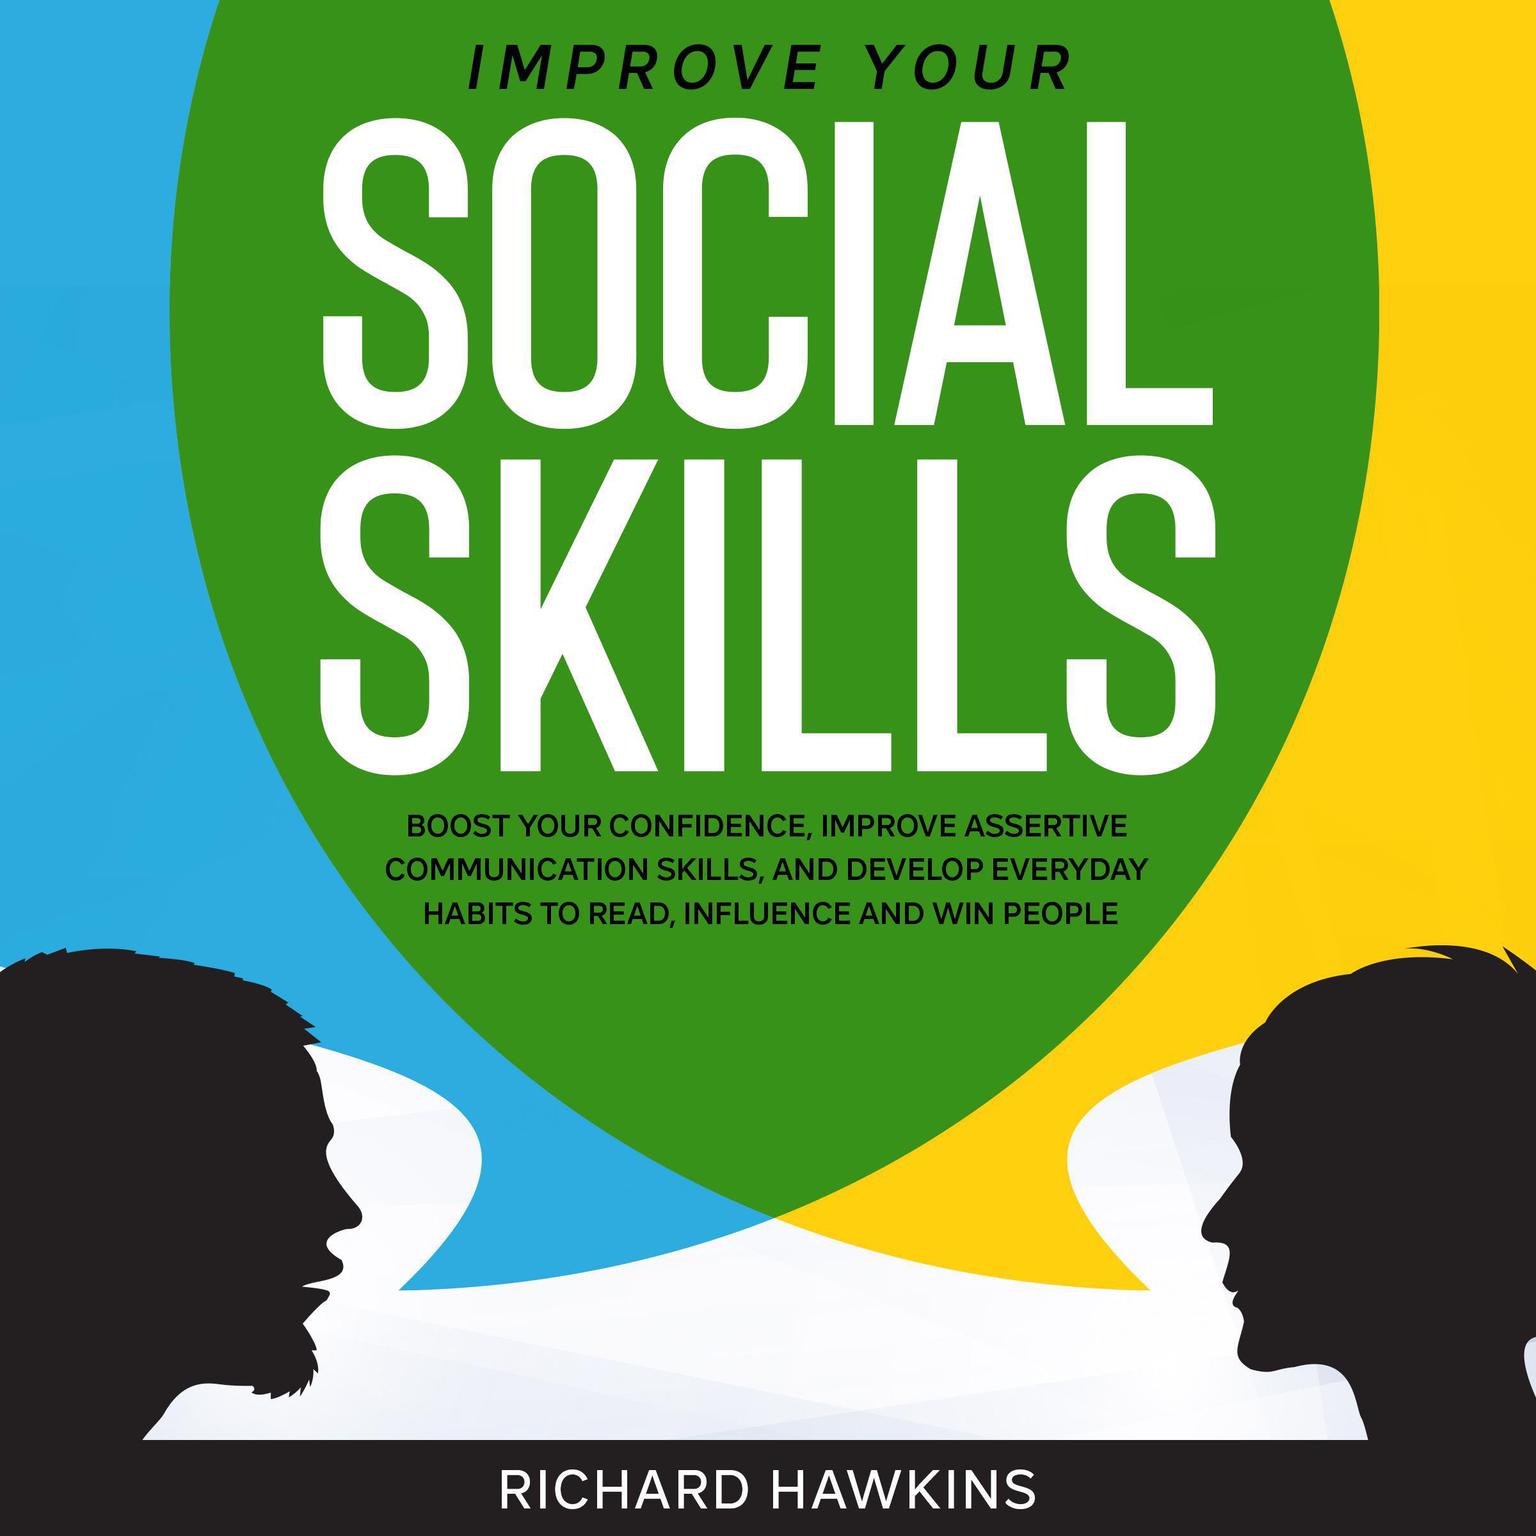 Improve Your Social Skills: Boost Your Confidence, Improve Assertive Communication Skills, and Develop Everyday Habits to Read, Influence and Win People Audiobook, by Richard Hawkins